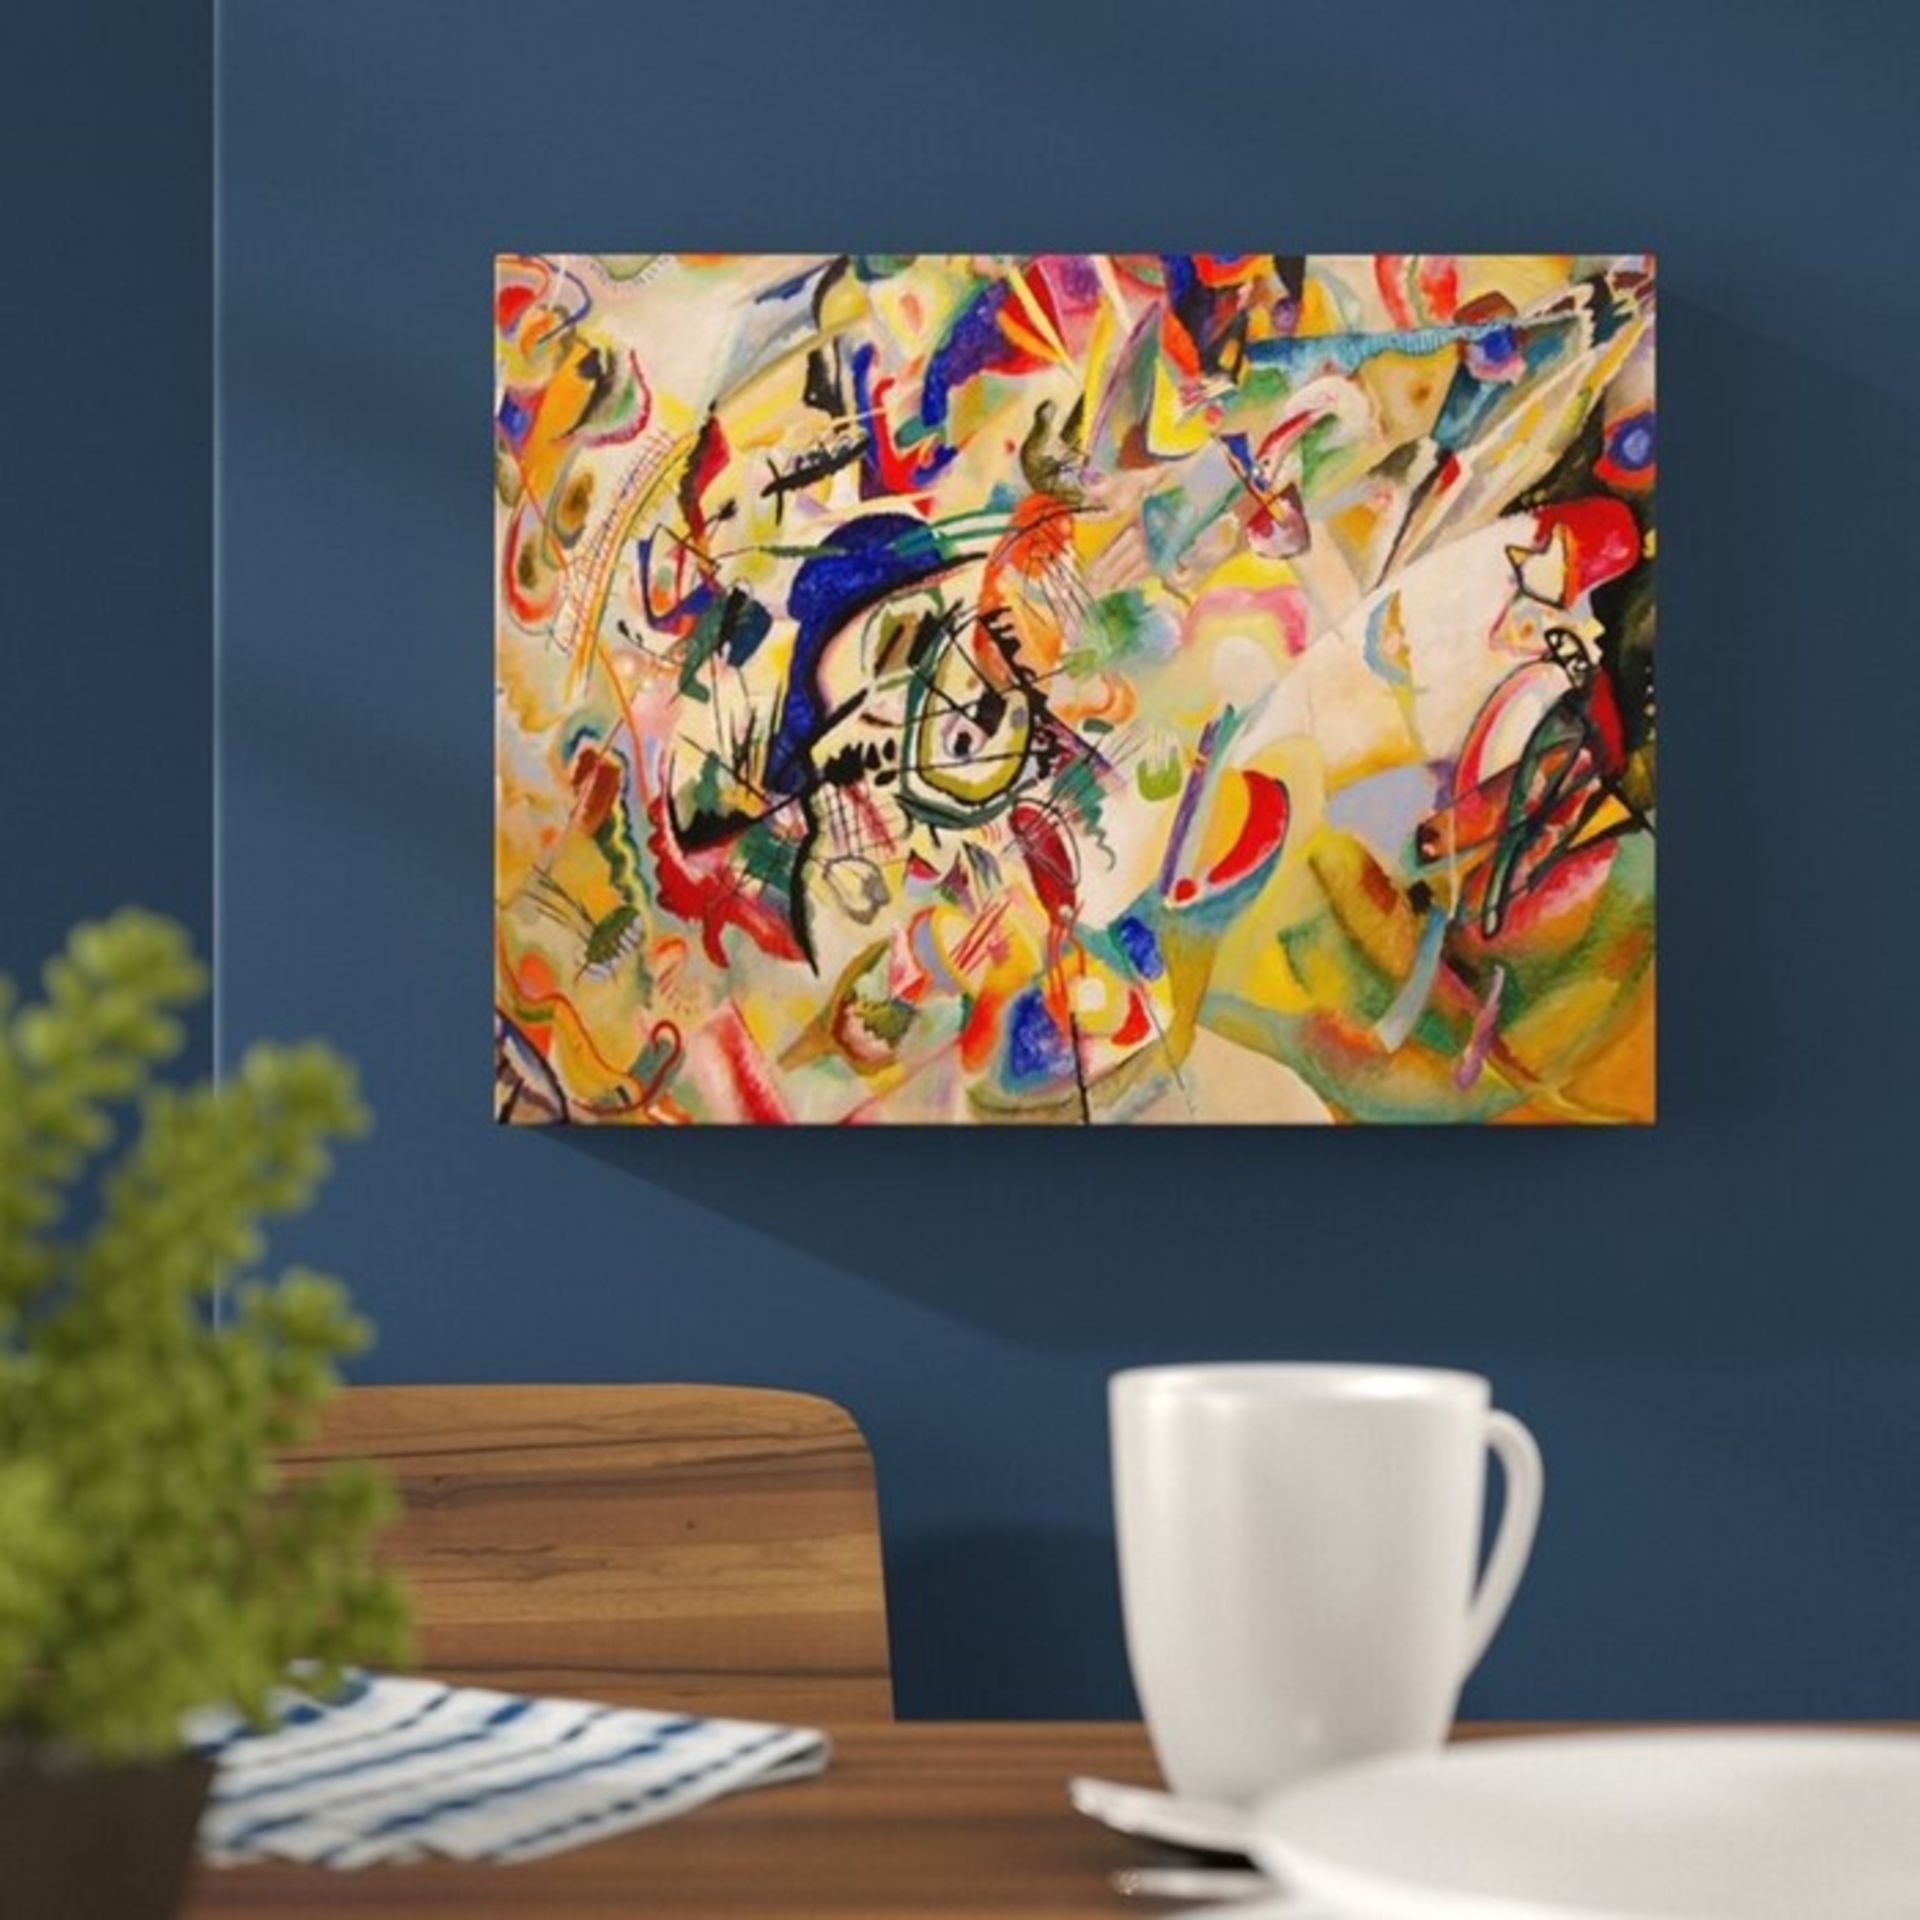 East Urban Home, Composition 7 by Wassily Kandinsky Painting Print on Wrapped Canvas - RRP £27.99 (